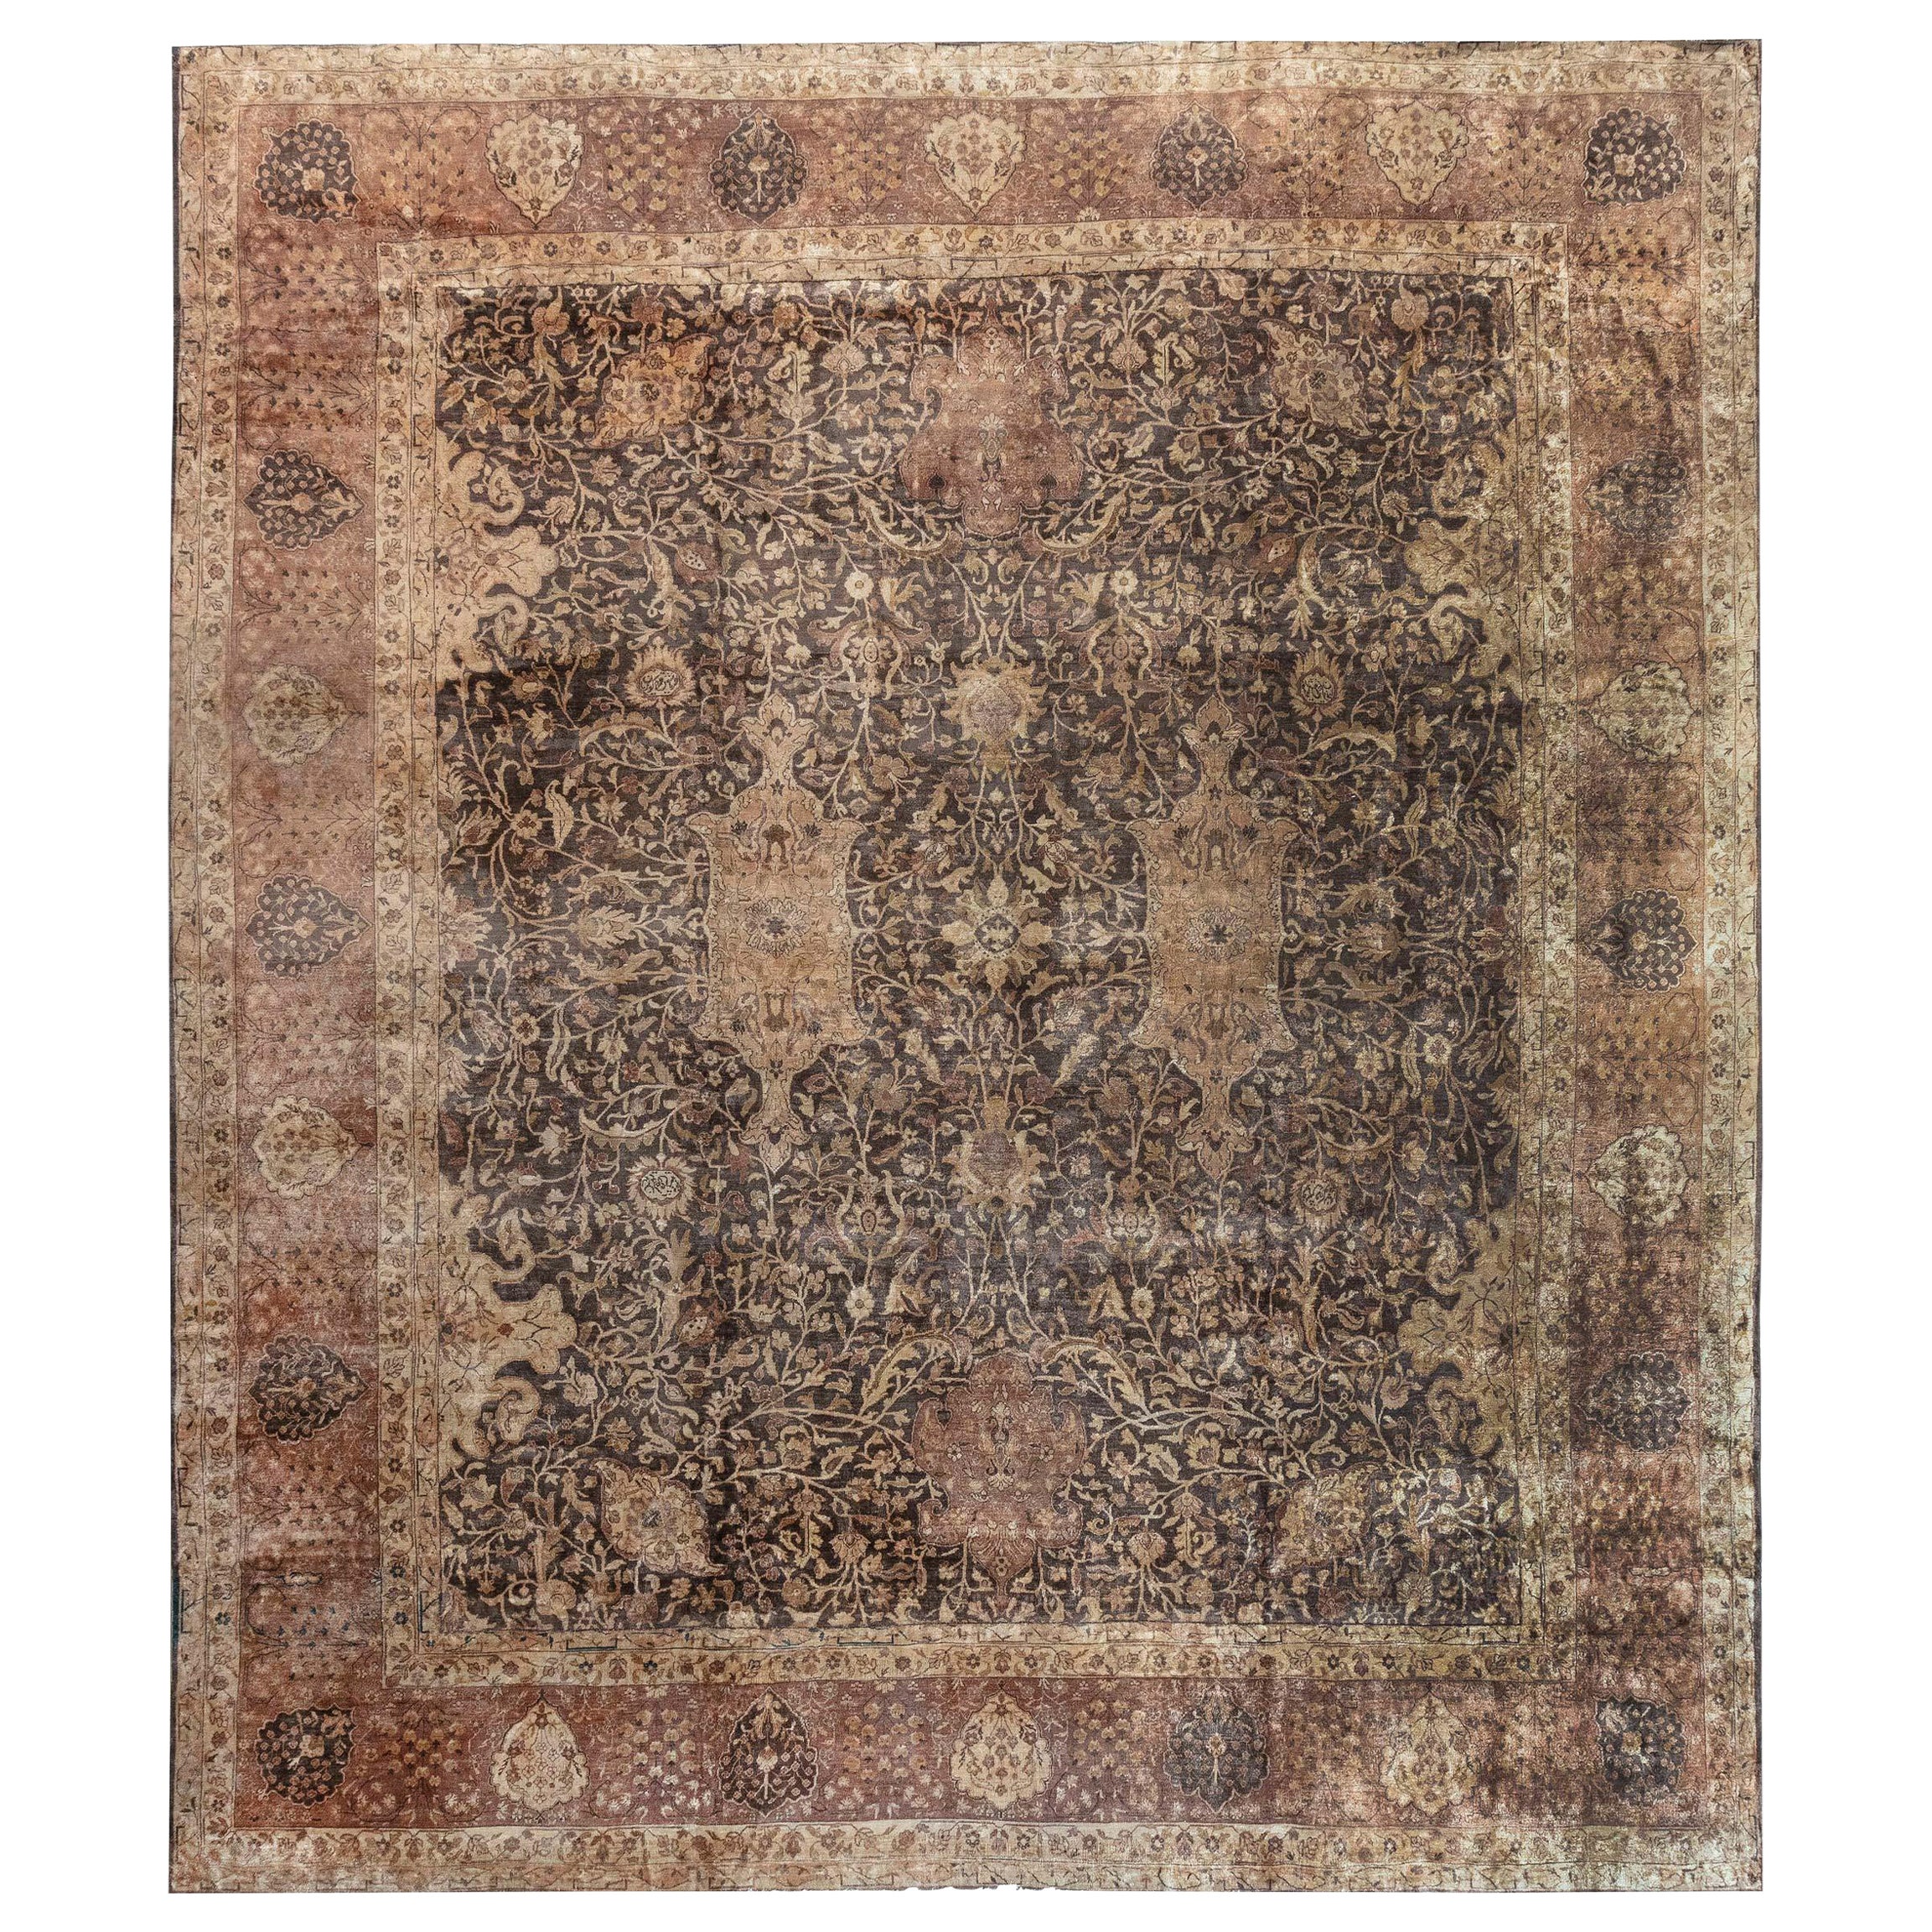 Early 20th Century Indian Chocolate Brown Handmade Wool Carpet (Size Adjusted) For Sale